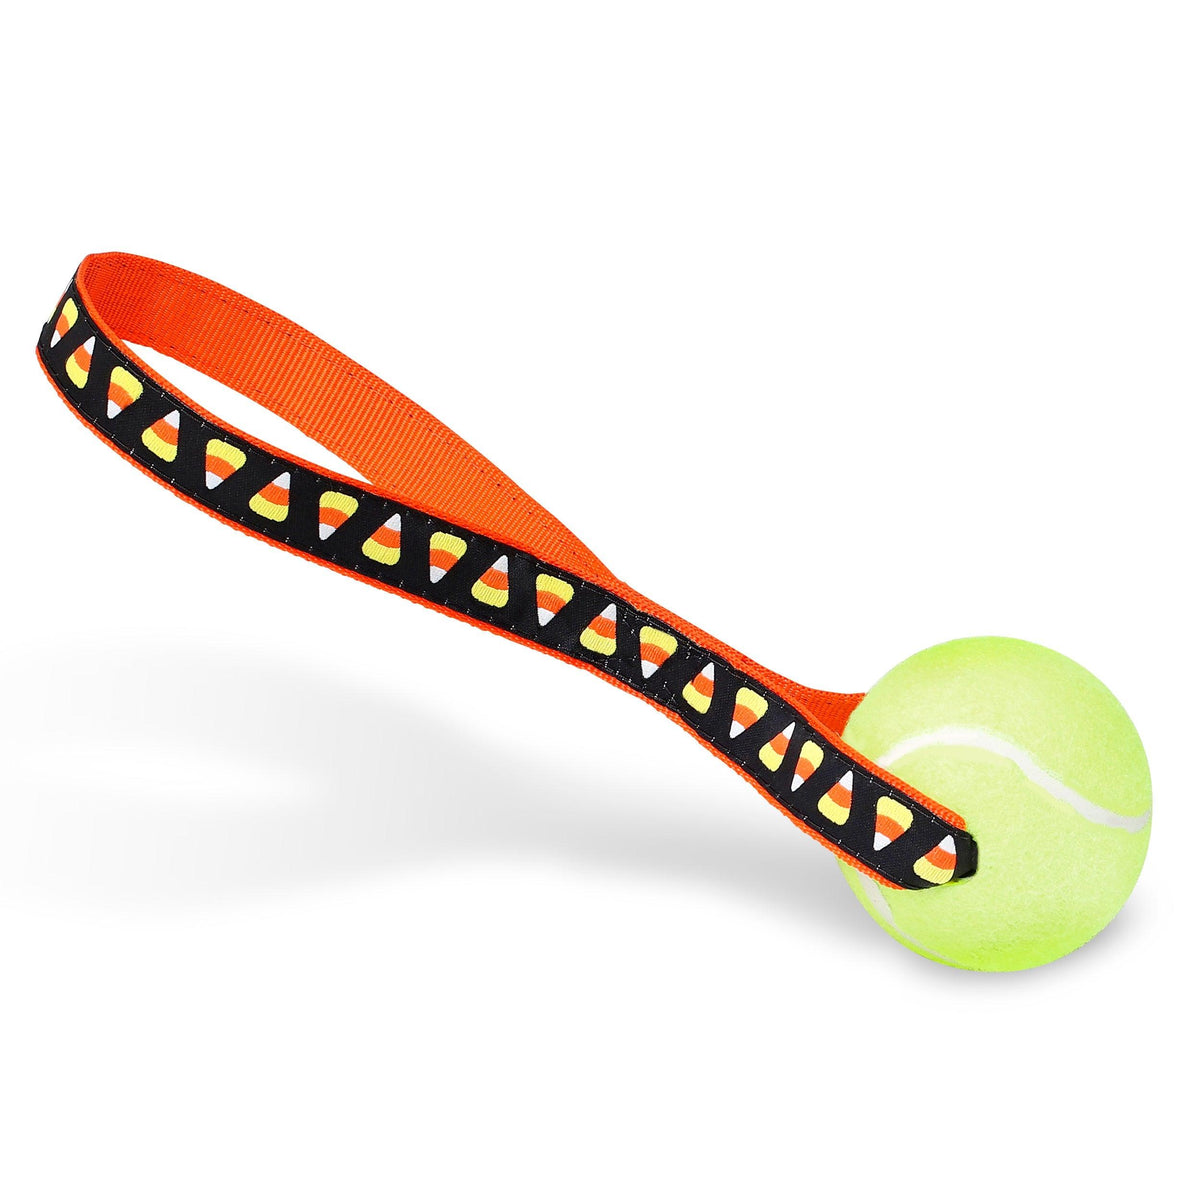 Candy Corn - Tennis Ball Toss Toy - VirtuousWares:Global